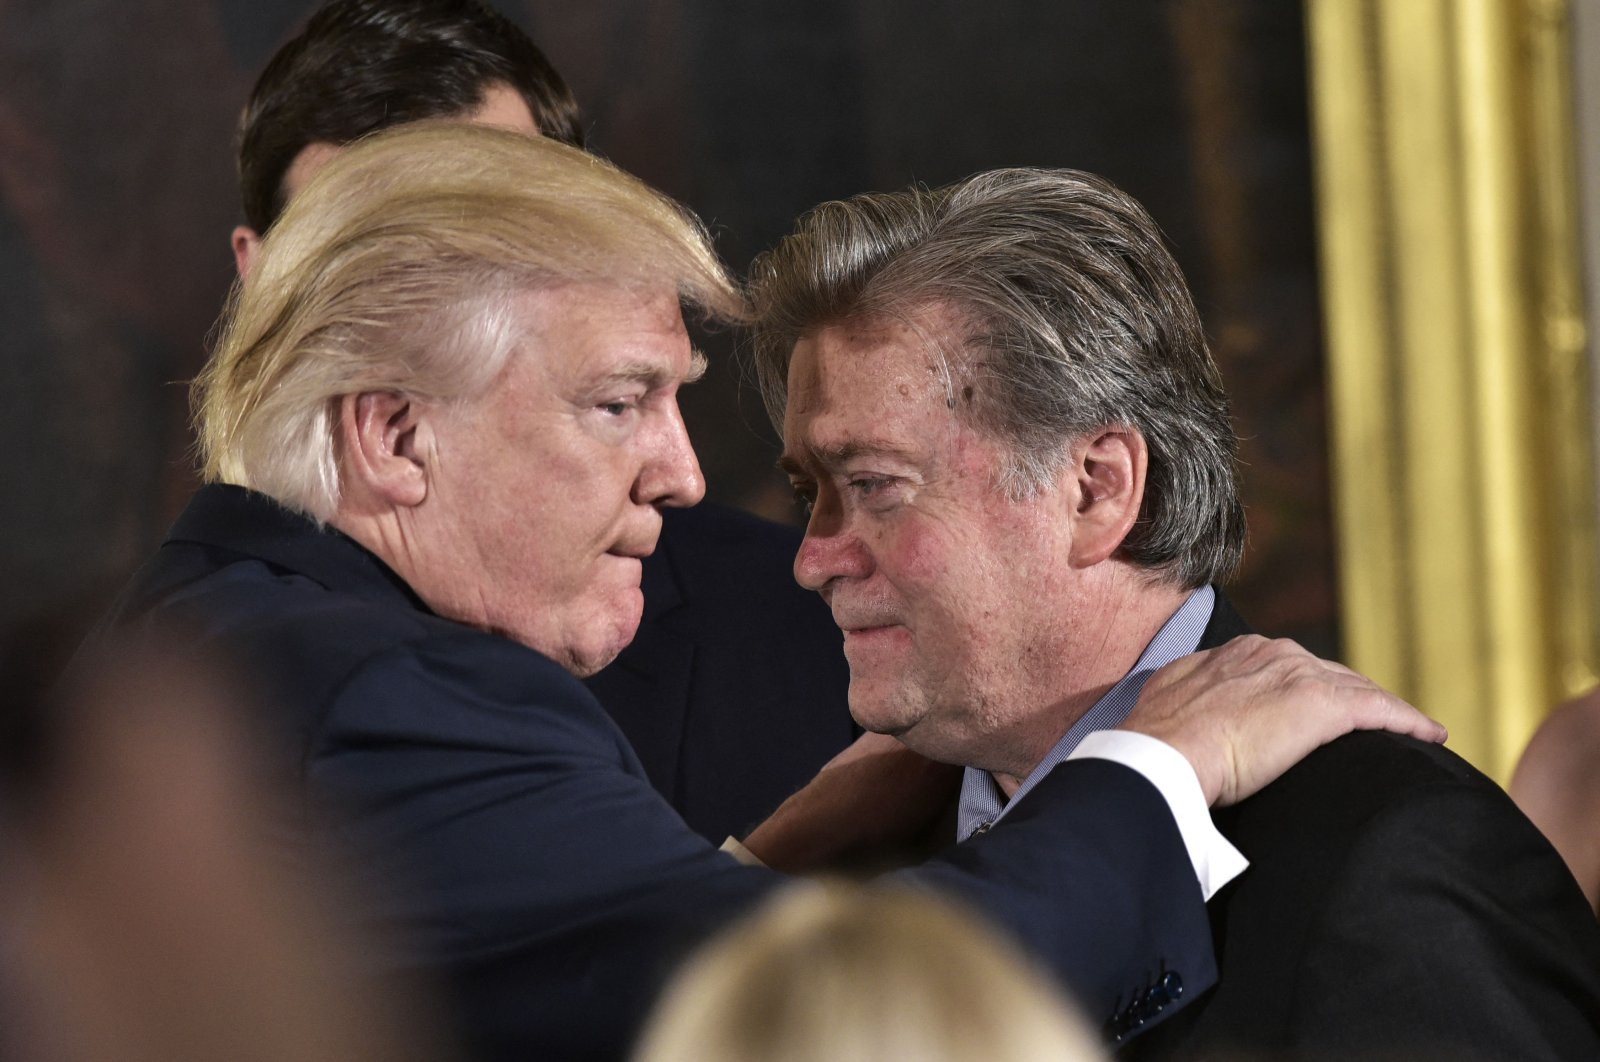 Former U.S. President Donald Trump (L) congratulates Senior Counselor to the President Stephen Bannon during the swearing-in of senior staff in the East Room of the White House in Washington, D.C., U.S., Jan. 22, 2017. (AFP Photo)